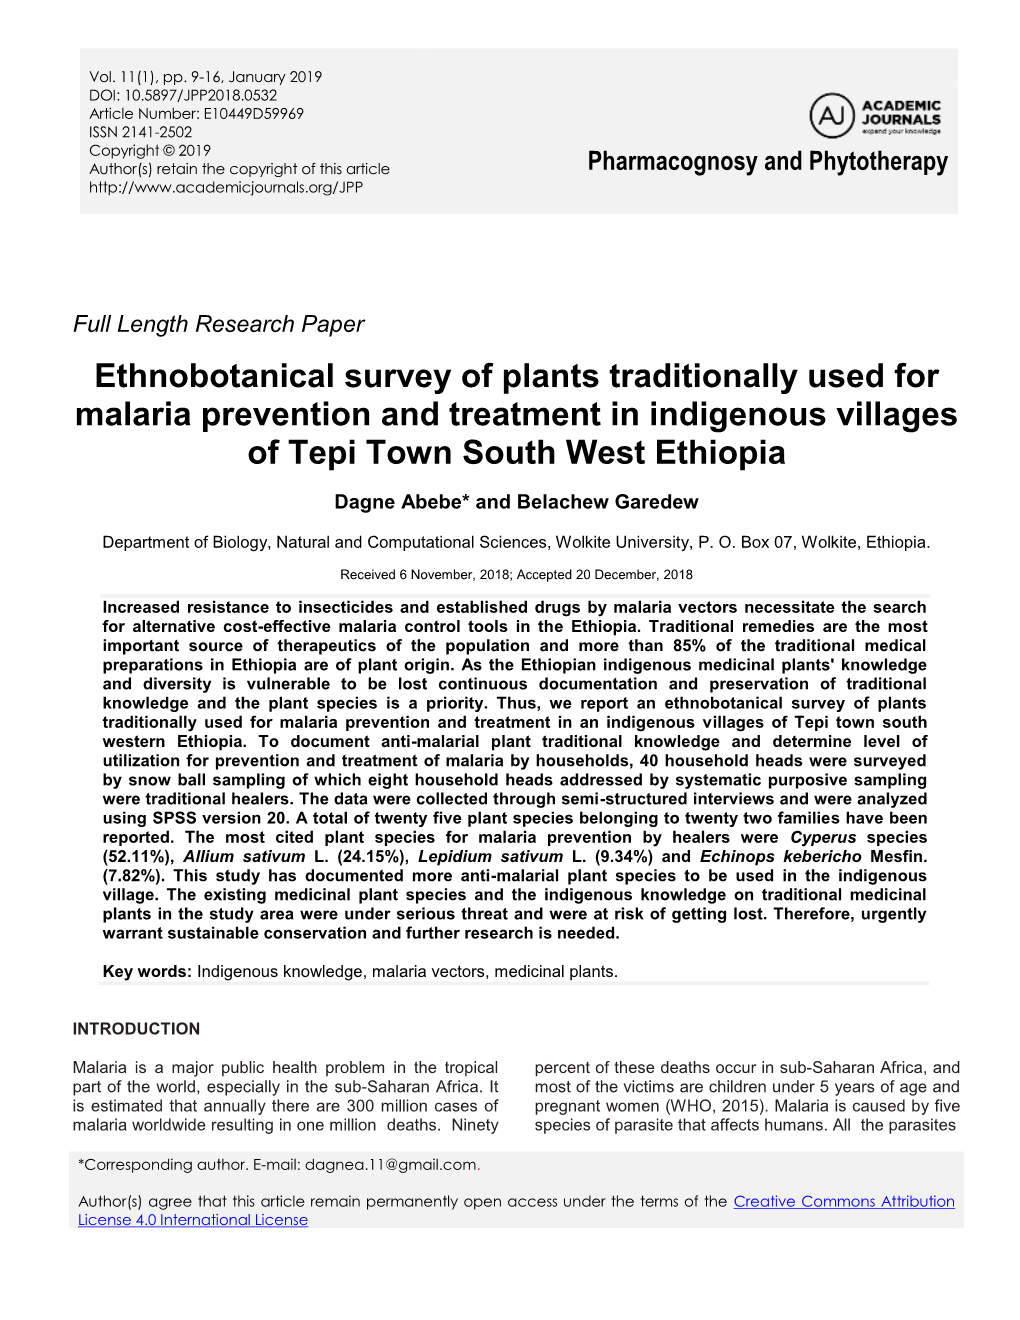 Ethnobotanical Survey of Plants Traditionally Used for Malaria Prevention and Treatment in Indigenous Villages of Tepi Town South West Ethiopia